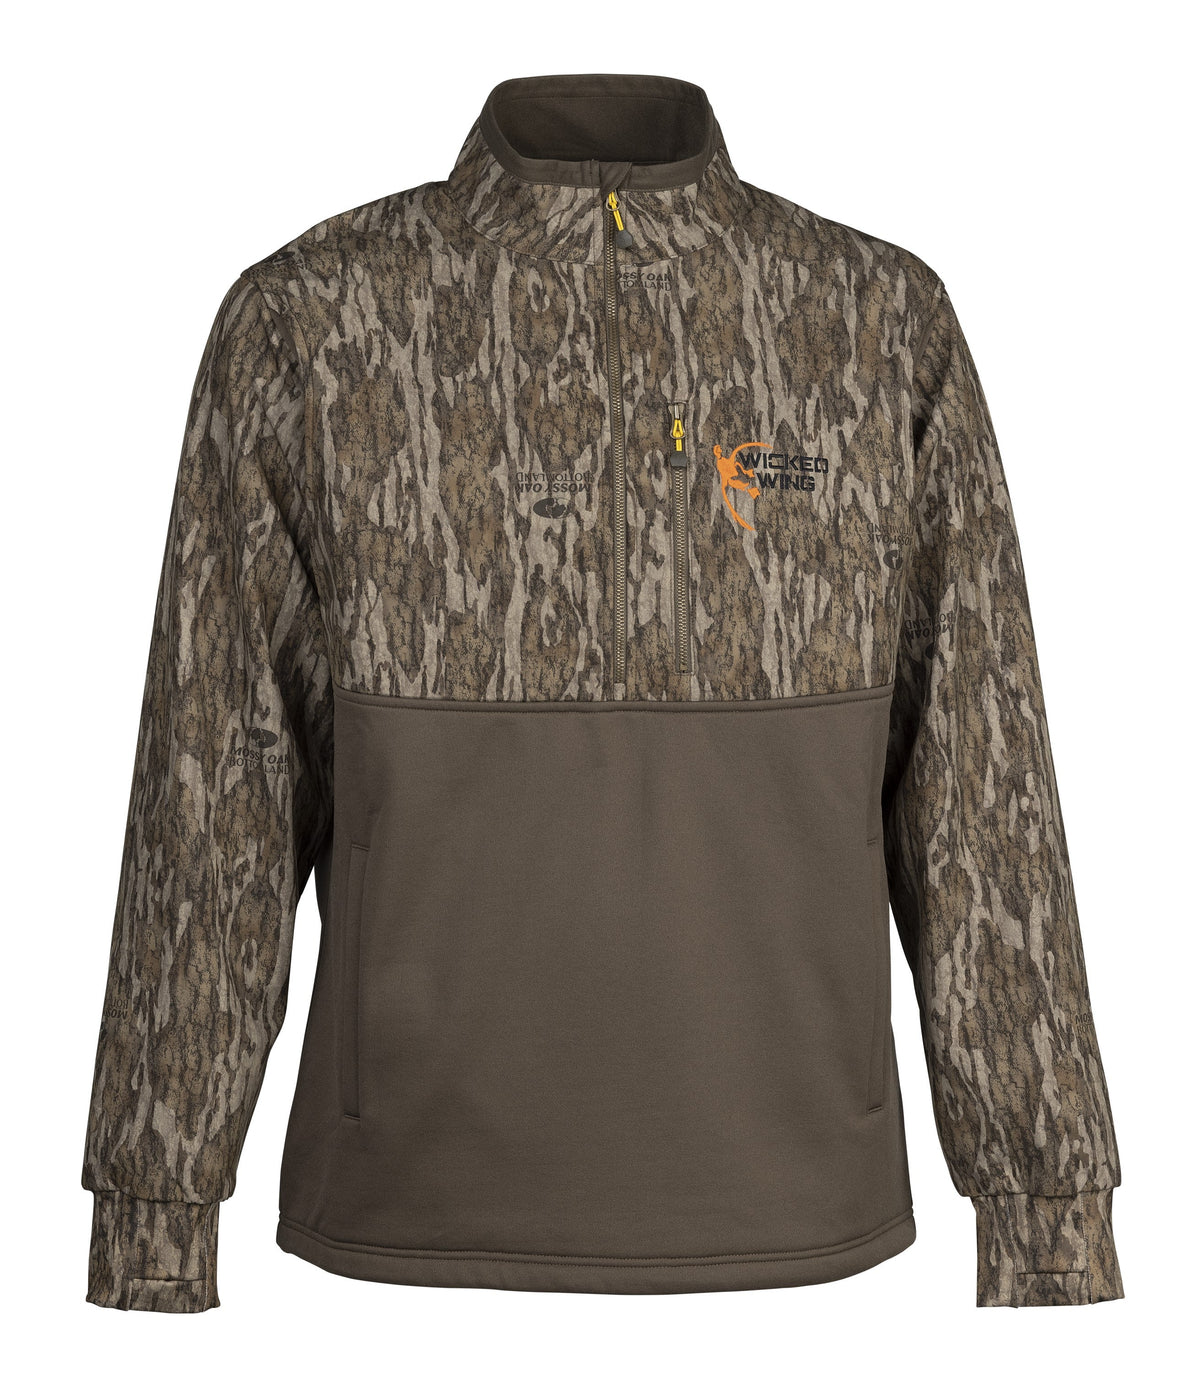 SHT,WW,SMOOTHBORE 1/4 ZIP,MOBL,S